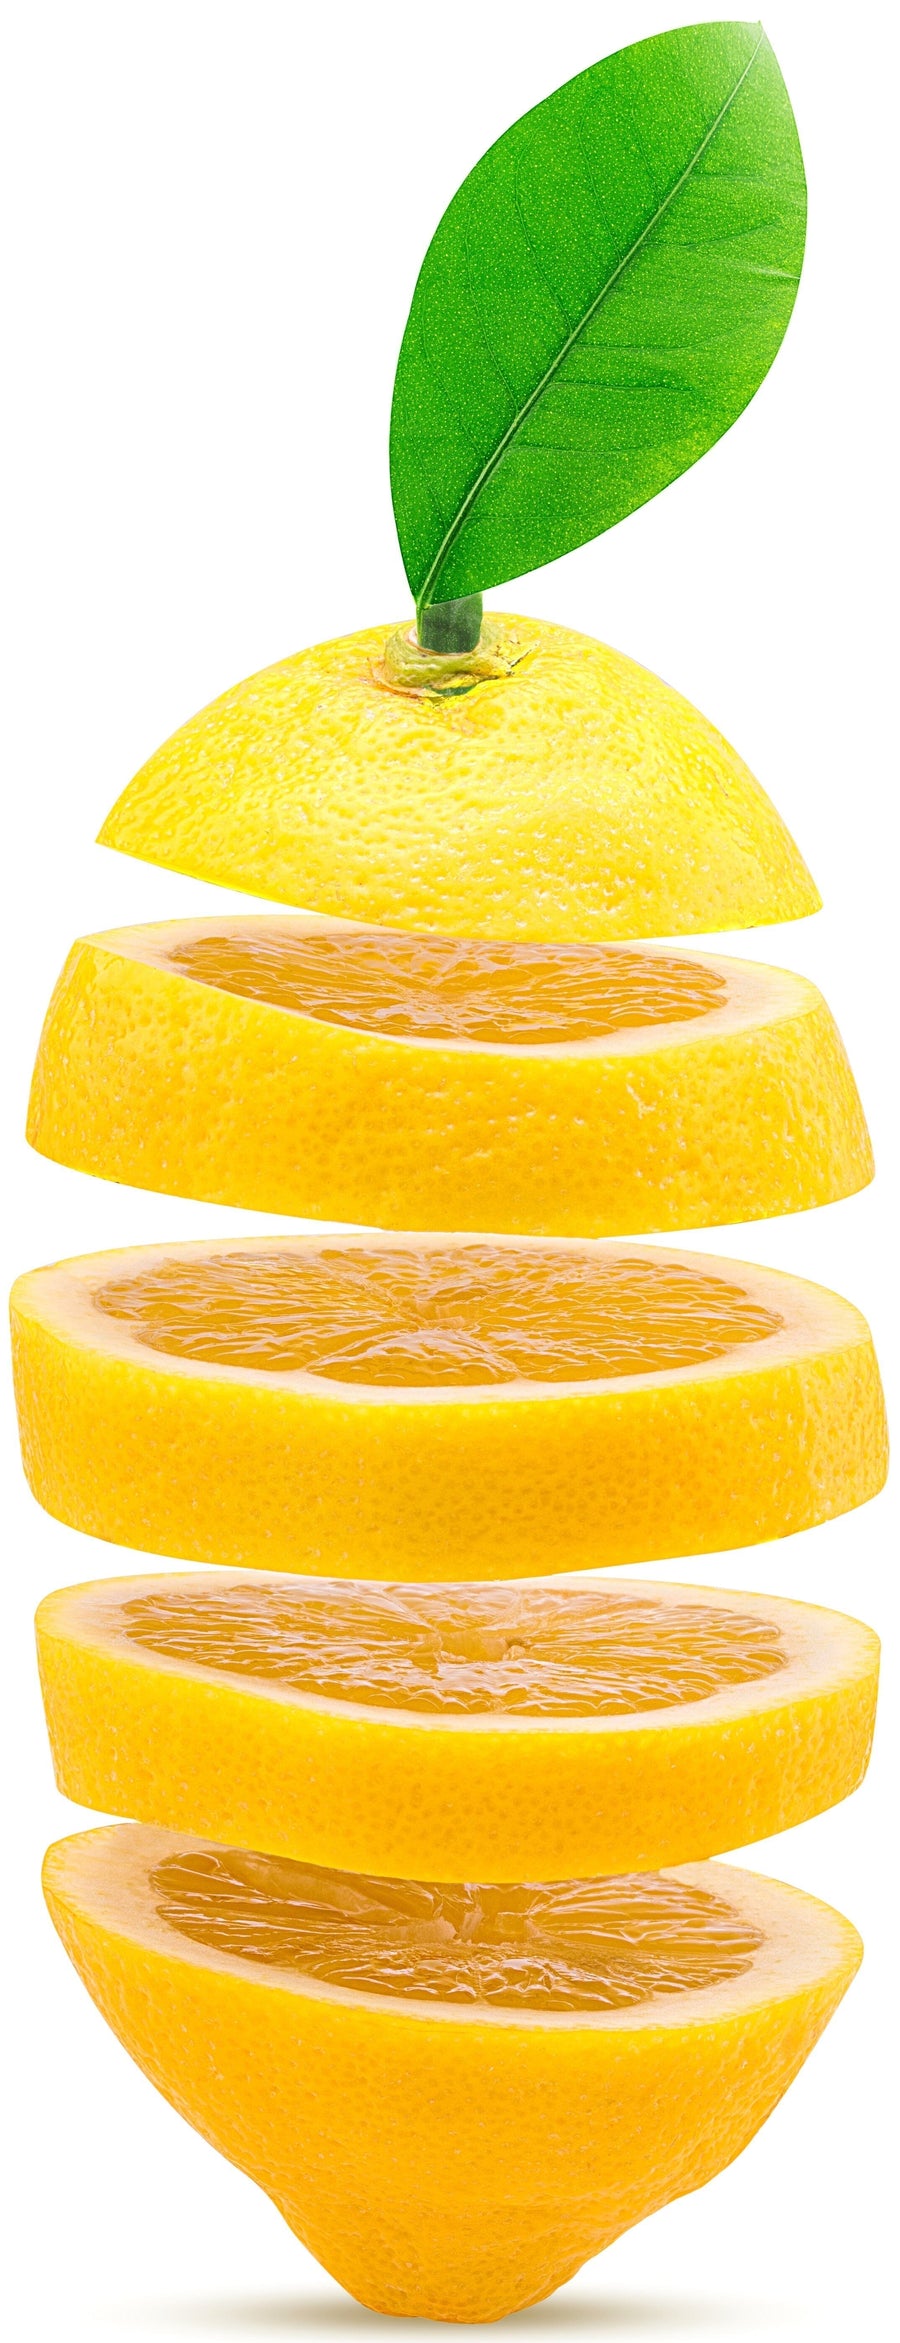 Image showing whole Lemon sliced with slices suspended above each other.